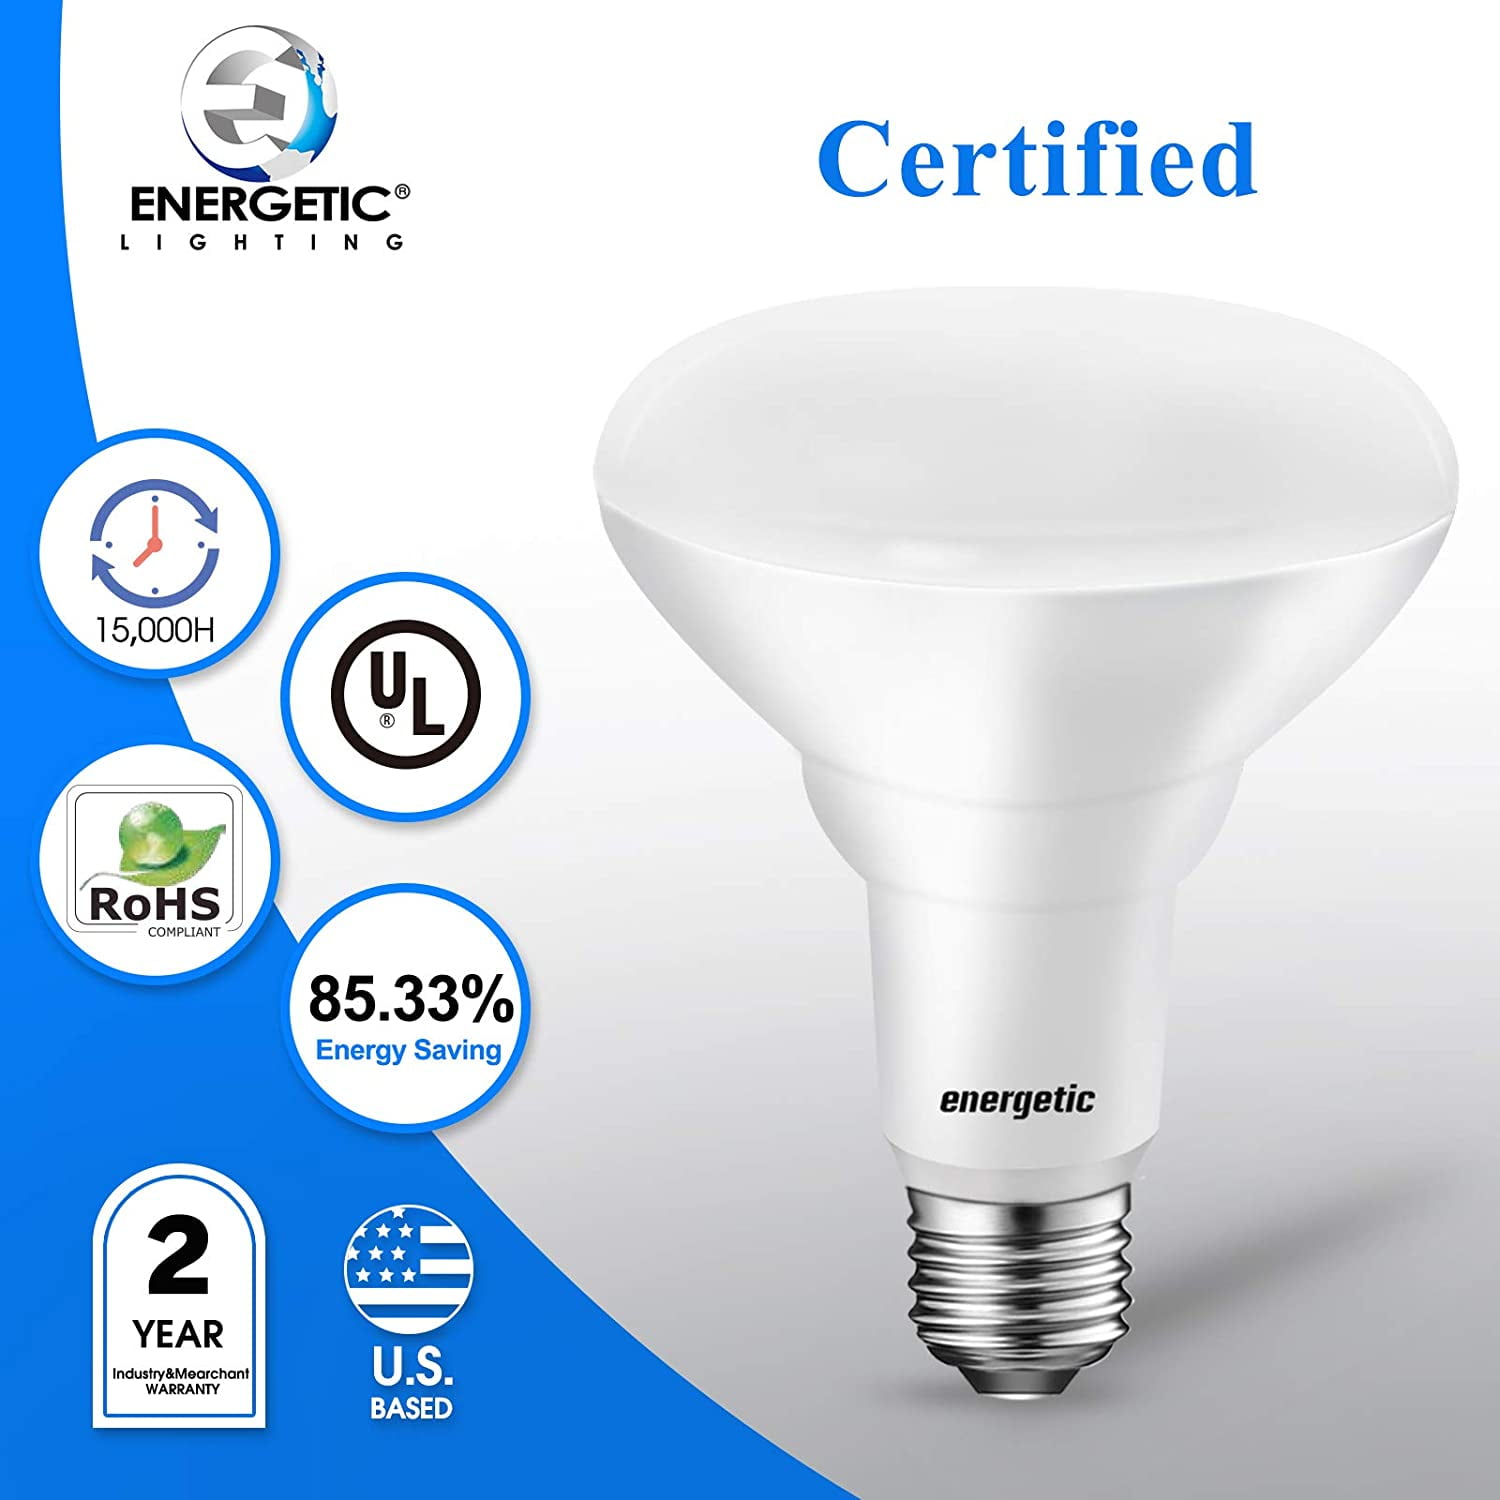 Dimmable Ceiling Flood Light Bulb for Cans 11W=75W UL Listed 6-Pack BR30 LED Recessed Light Bulb 2700K Soft White 900LM CRI85+ 